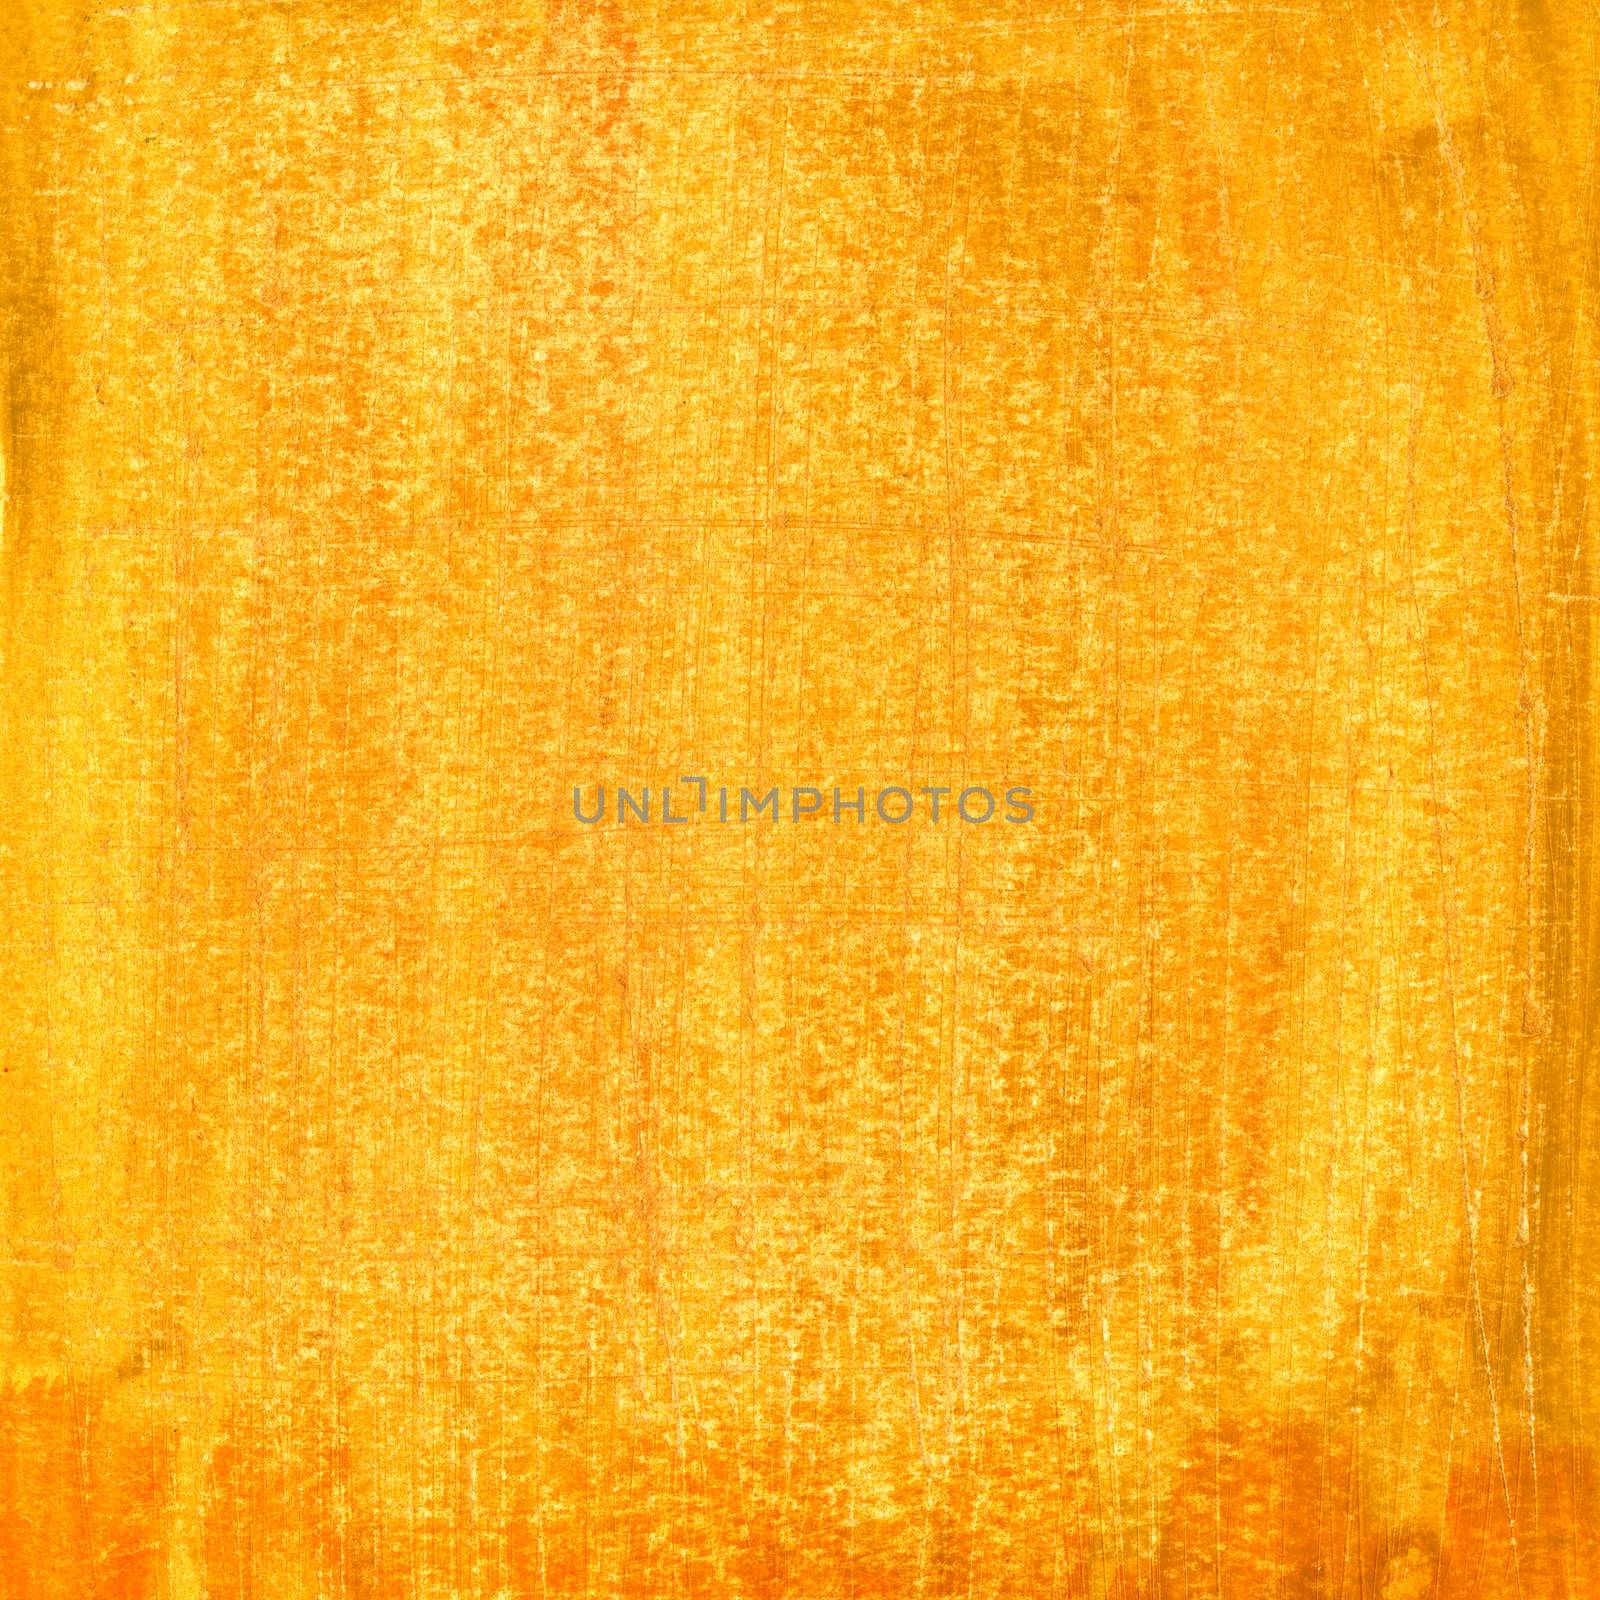 yellow and orange watercolor painted abstract with scratched paper texture, self made